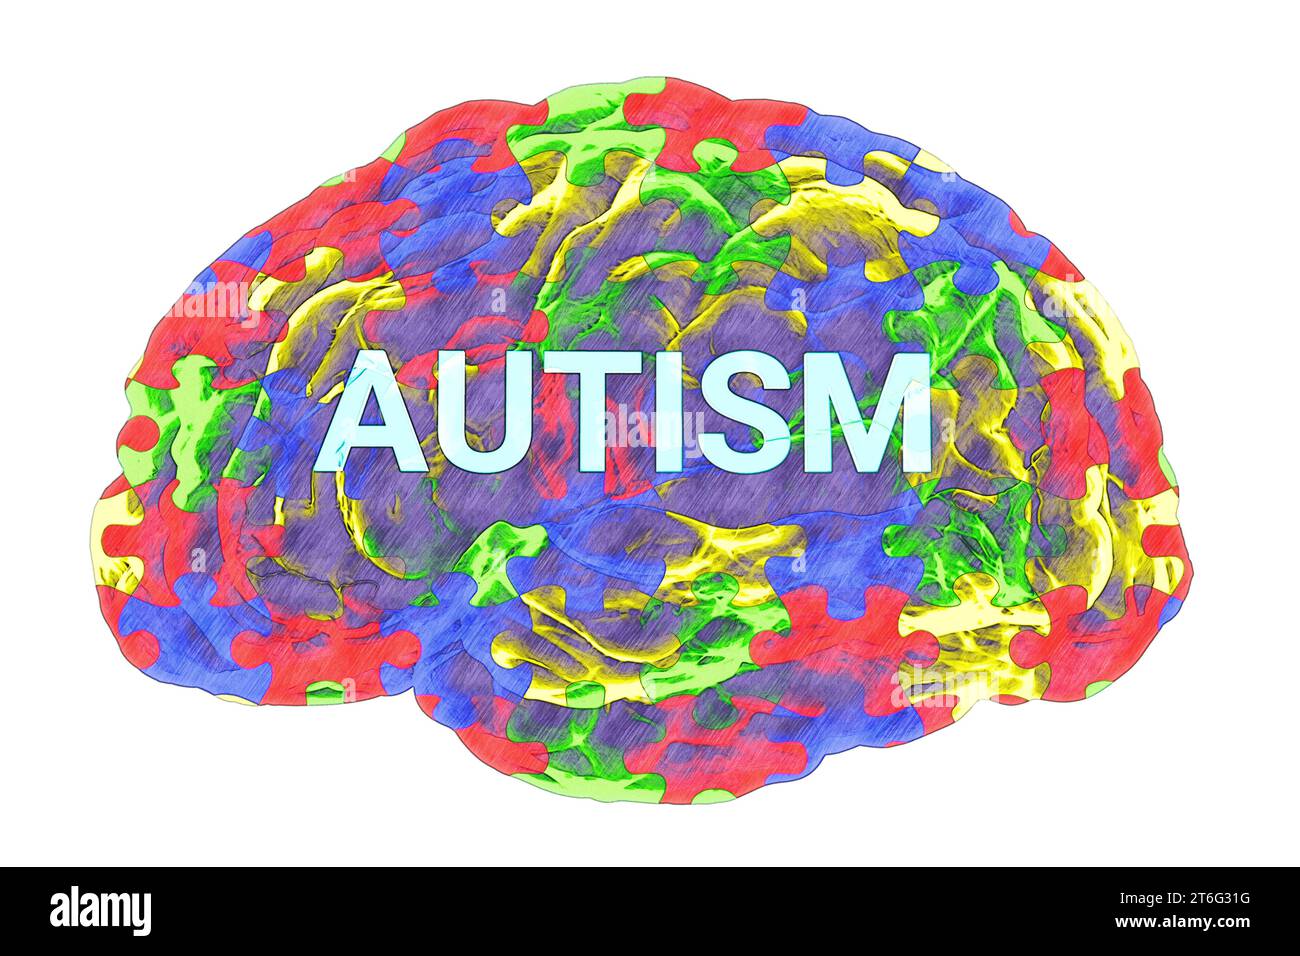 Text Autism inside the anatomical model of a human brain, with a colorful puzzle pattern on its surface, emphasizing the neurological basis and the di Stock Photo